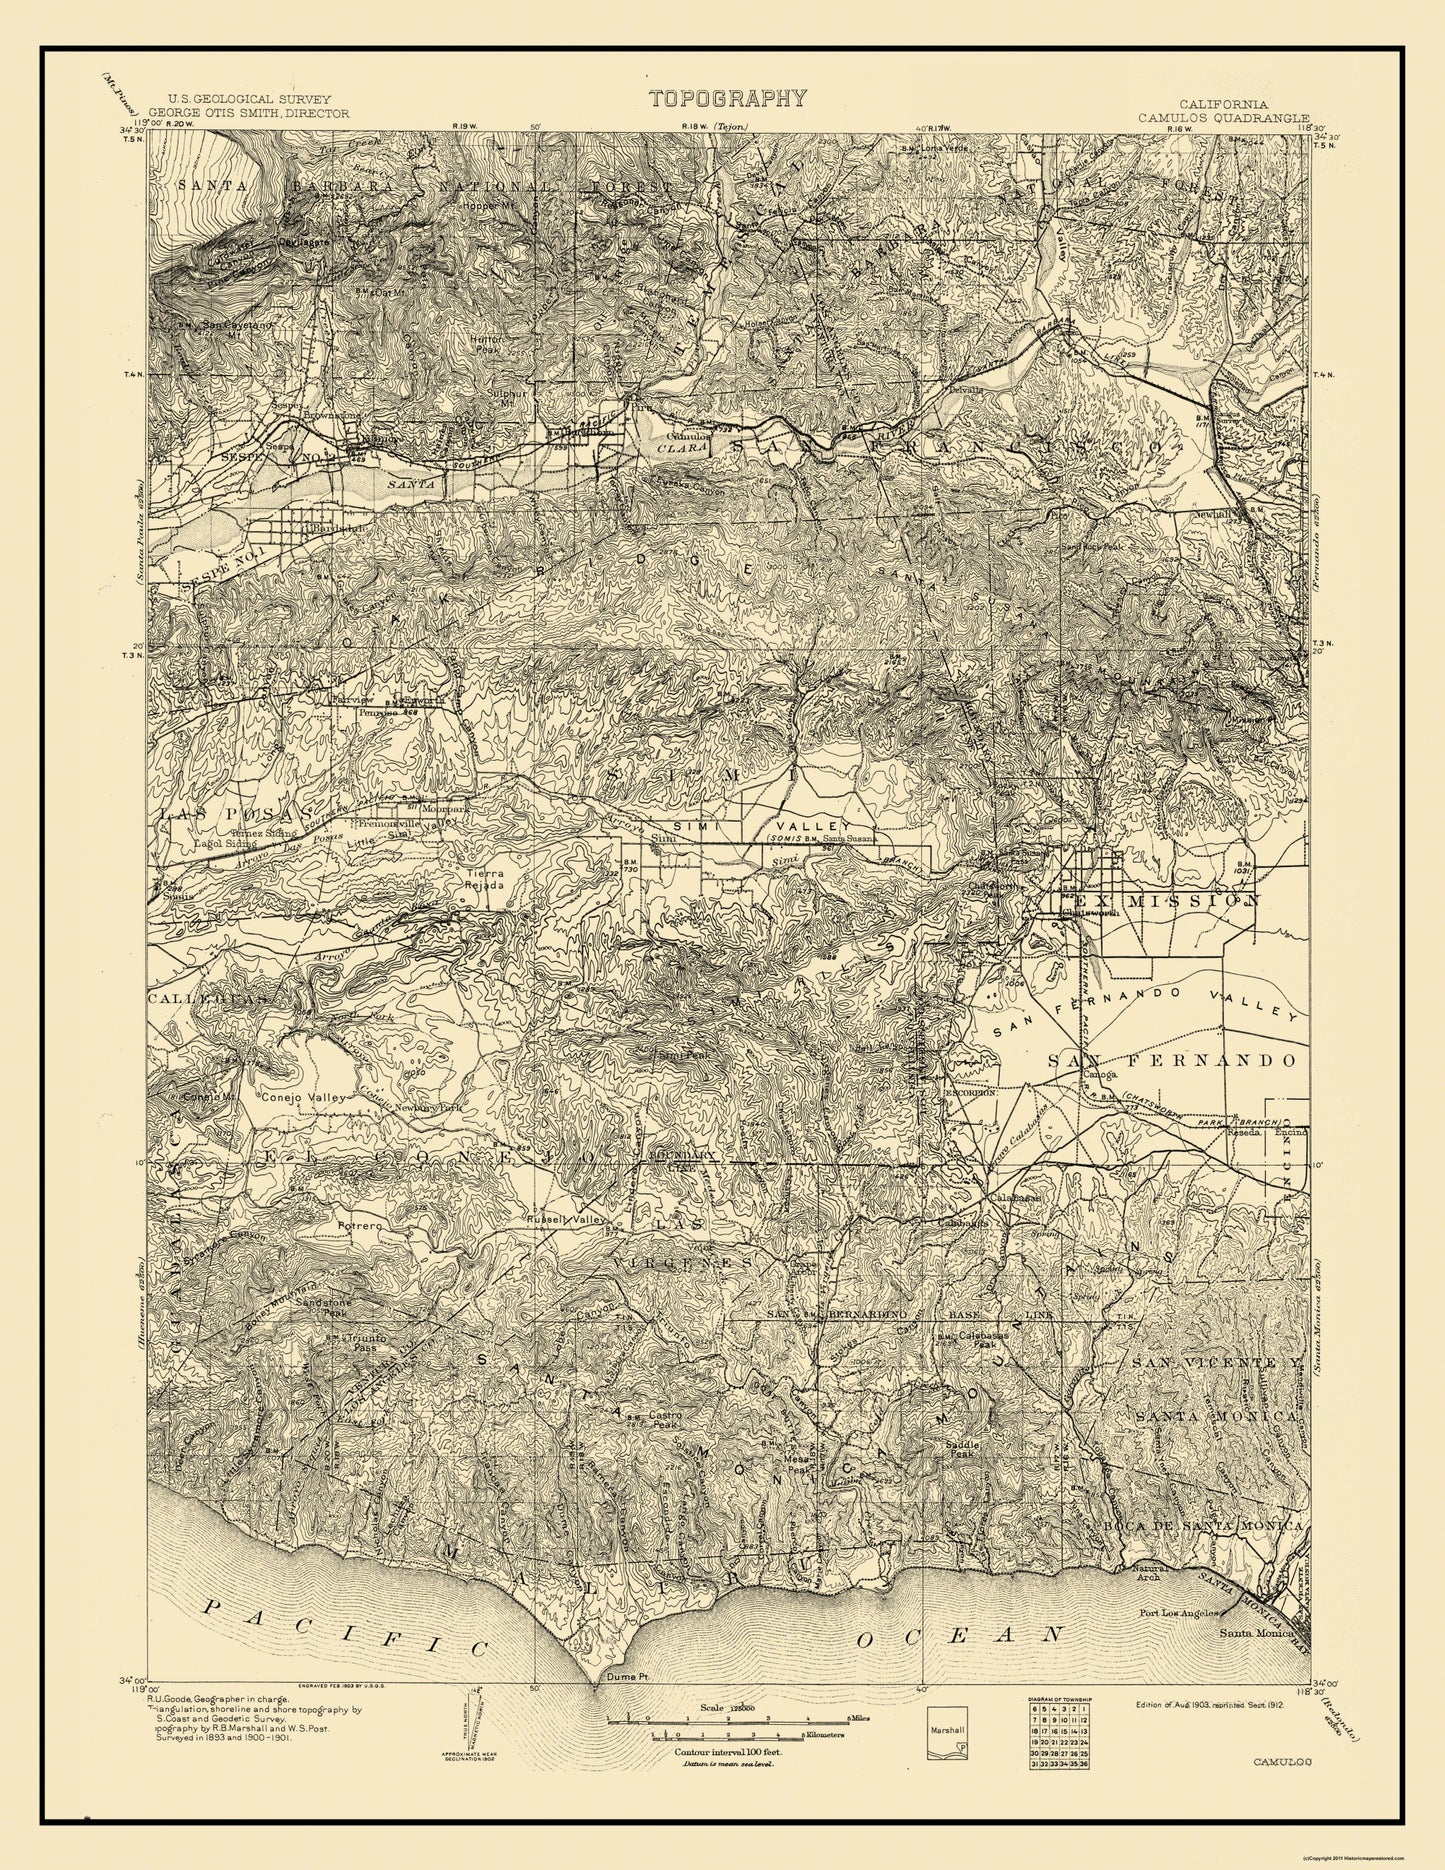 Topographical Map - Camulos California Quad - USGS 1903 - 23 x 29.75 - Vintage Wall Art